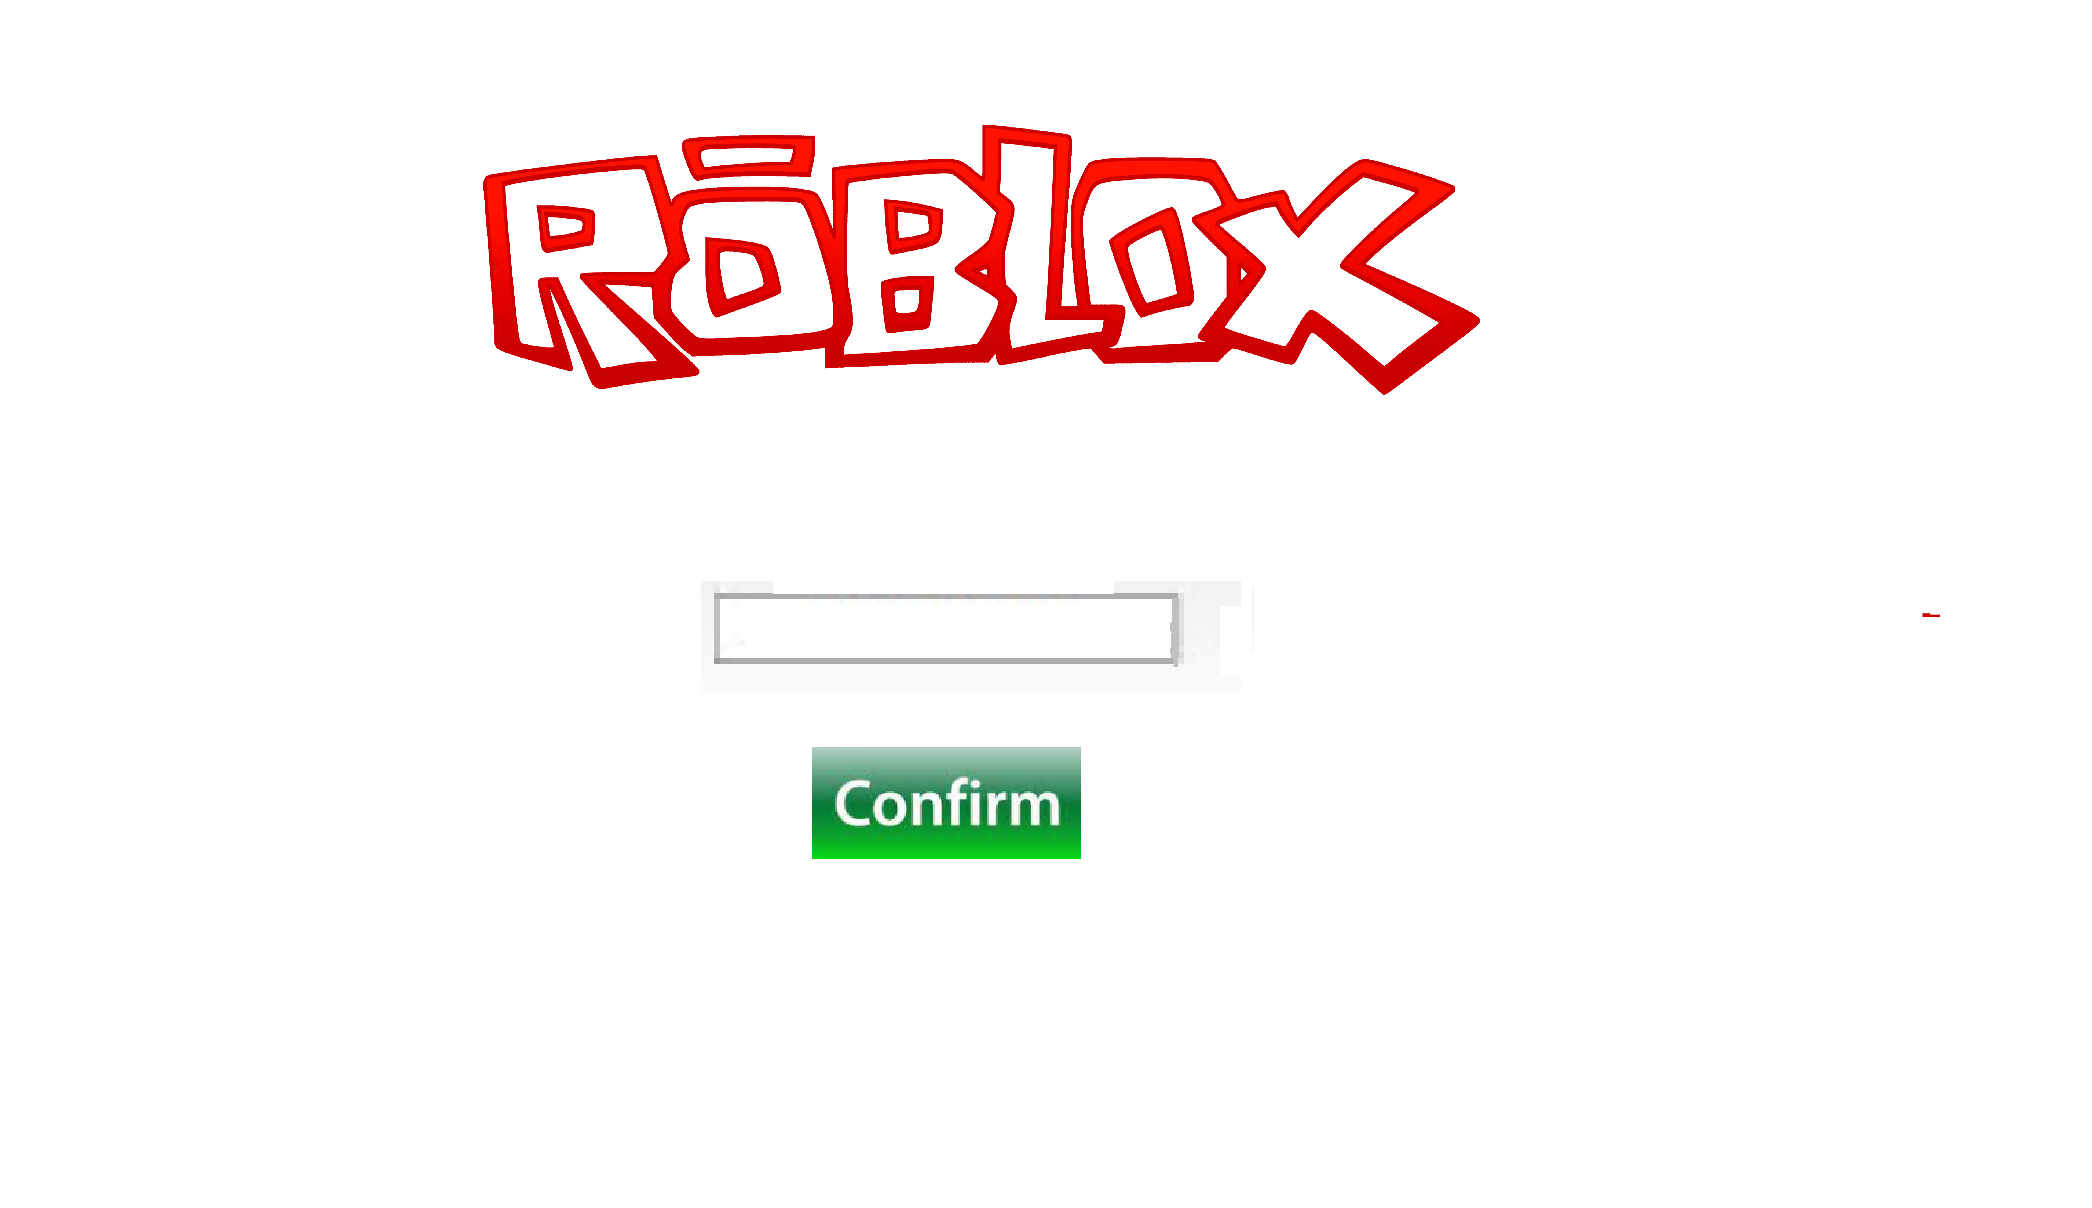 Roblox messed up again